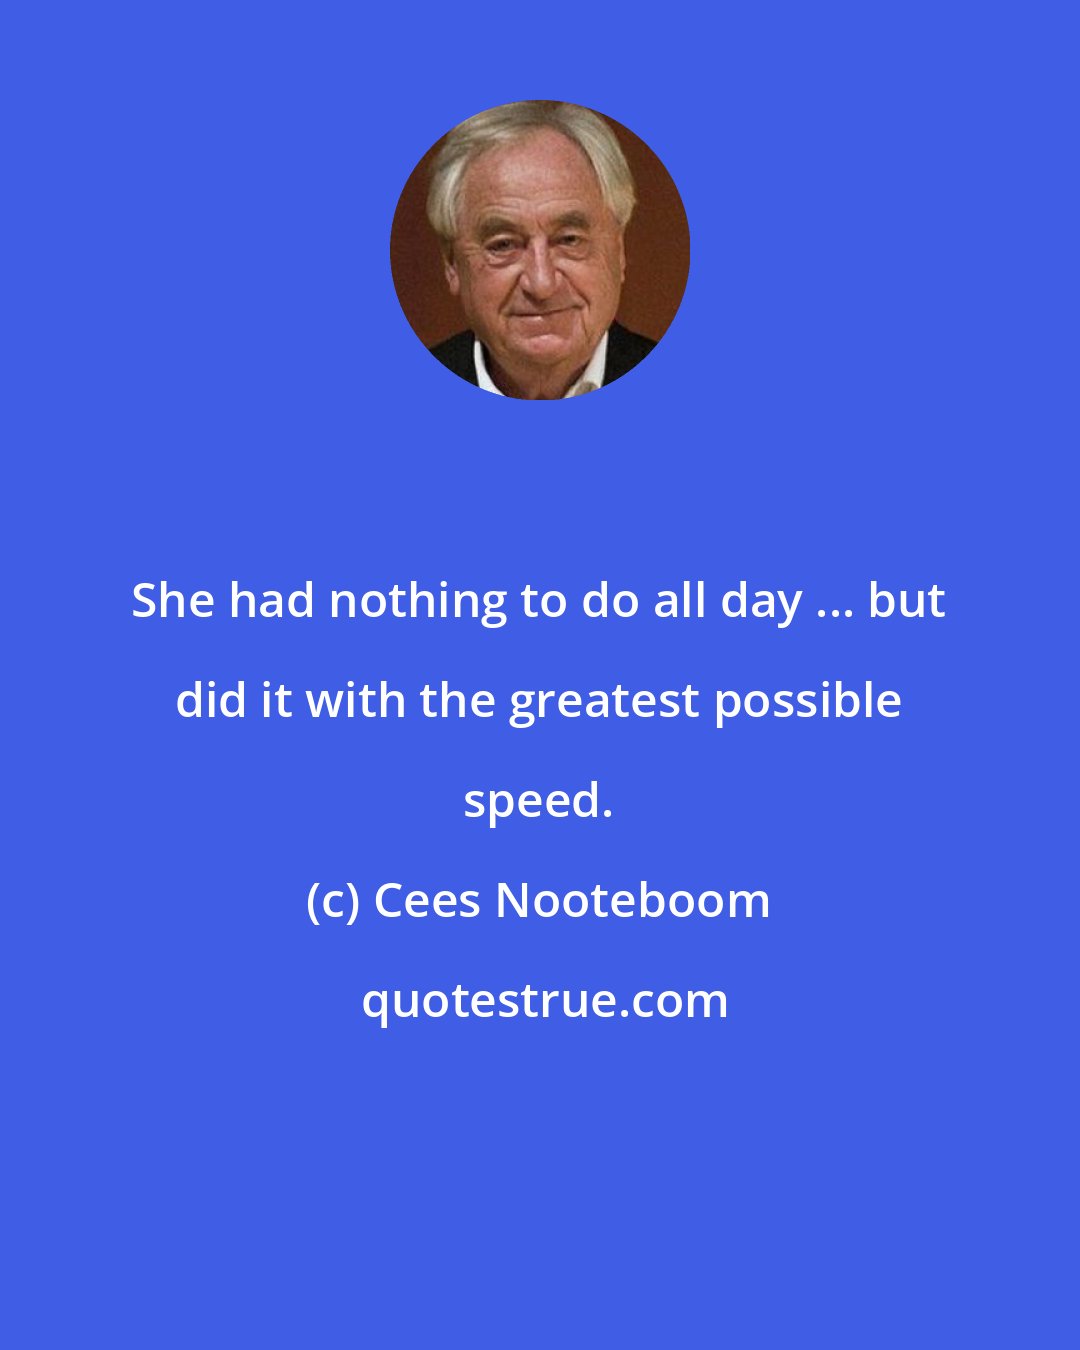 Cees Nooteboom: She had nothing to do all day ... but did it with the greatest possible speed.